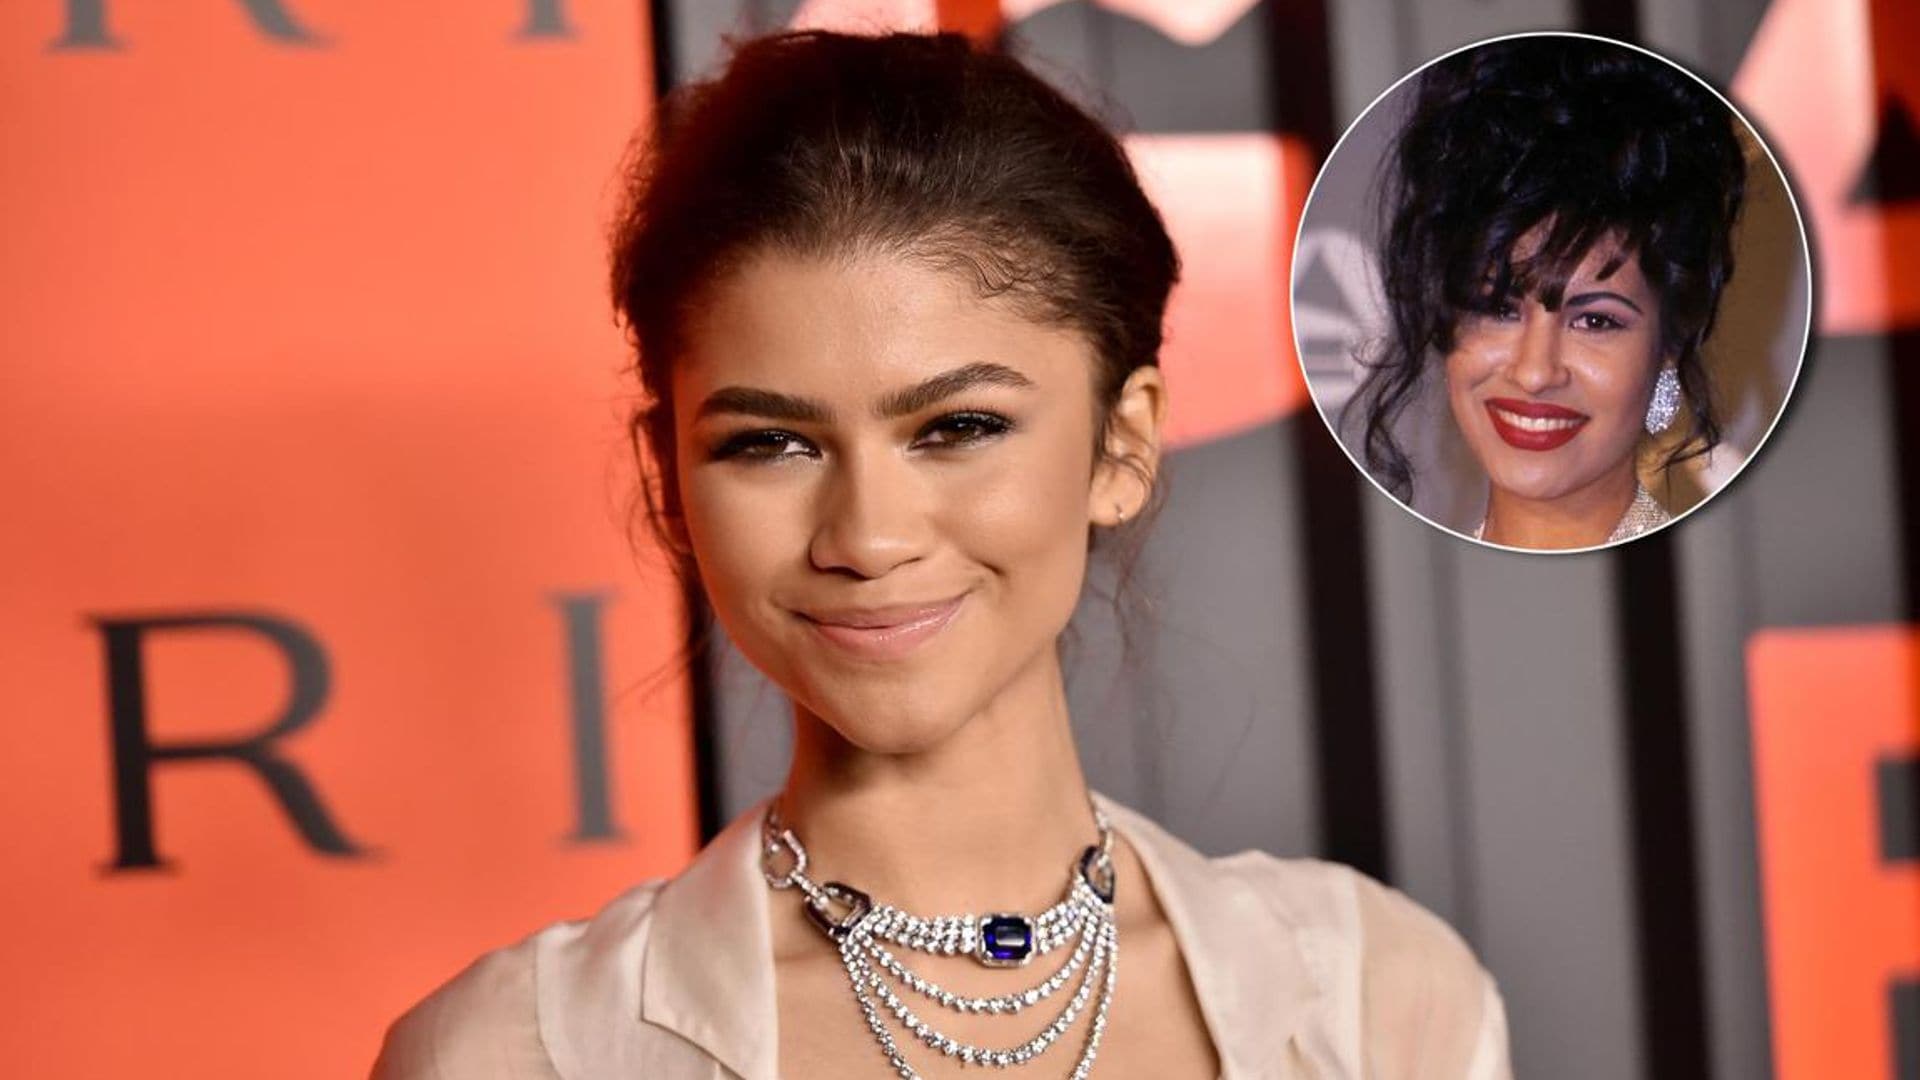 Did Zendaya channel Selena Quintanilla for her big night at the Emmys